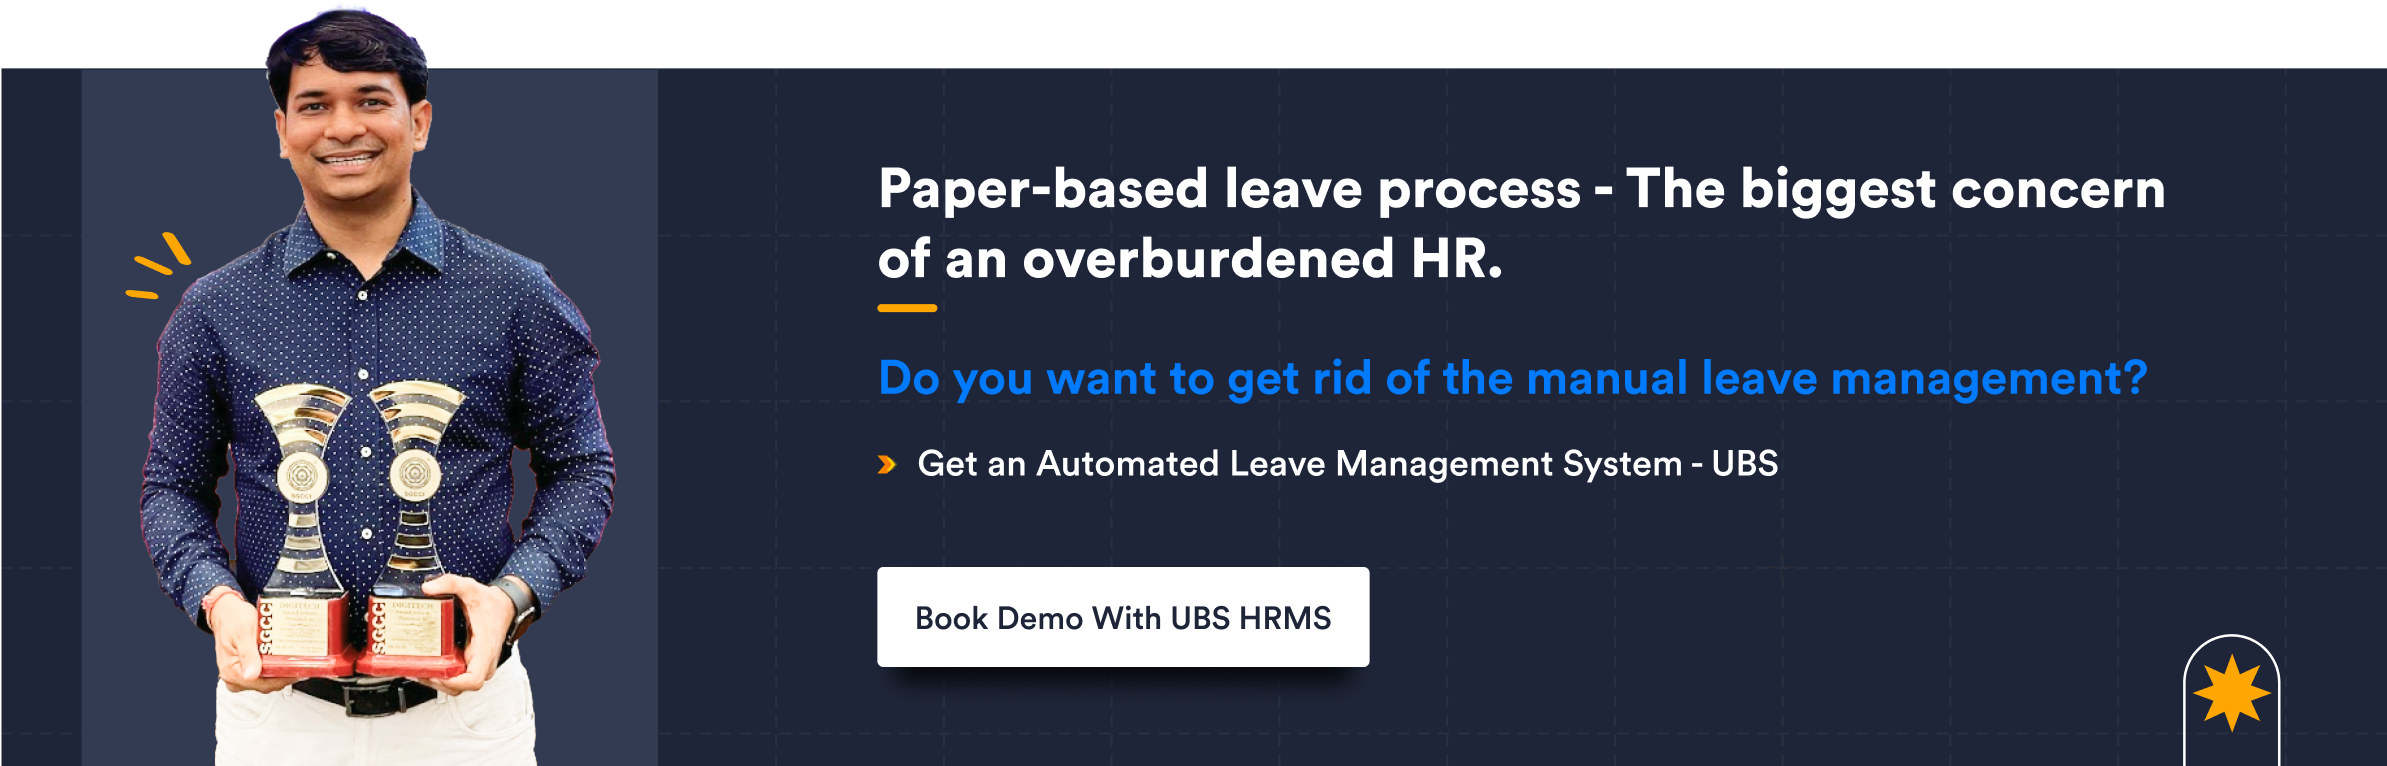 Paper based leave process The biggest concern of an overburdened HR.